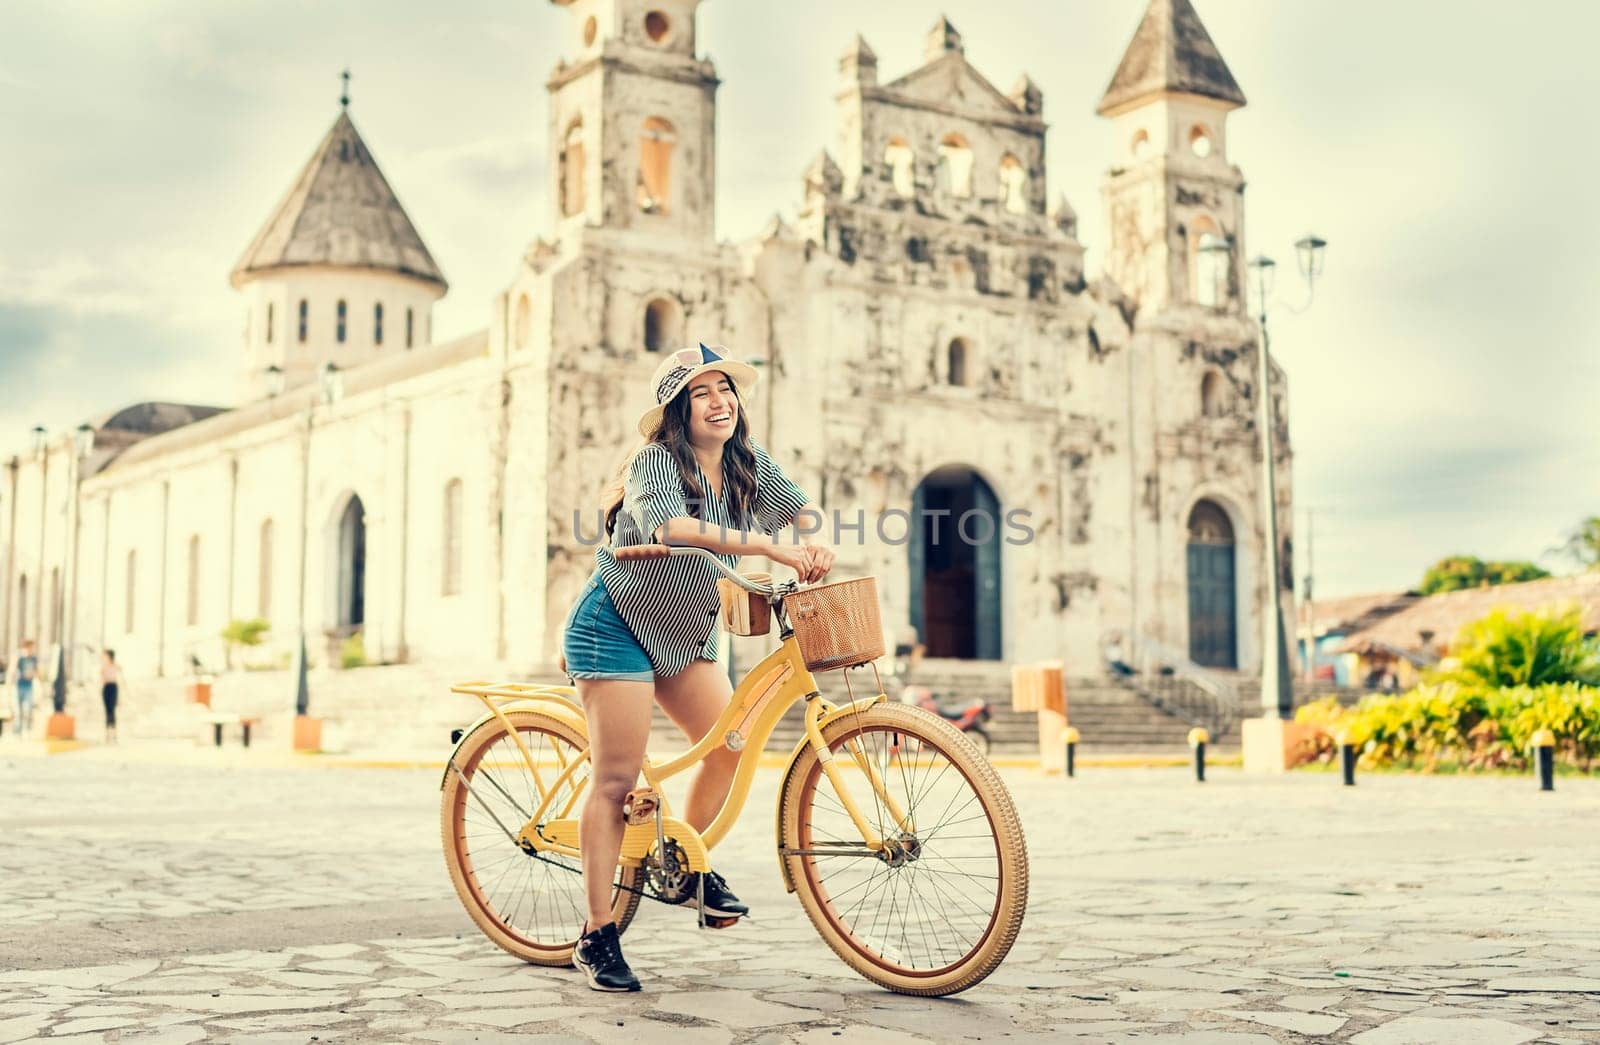 Lifestyle of a happy girl in hat on bicycle on the street. Granada, Nicaragua. Happy girl in hat riding a bicycle at sunset. Tourism and travel concept by isaiphoto